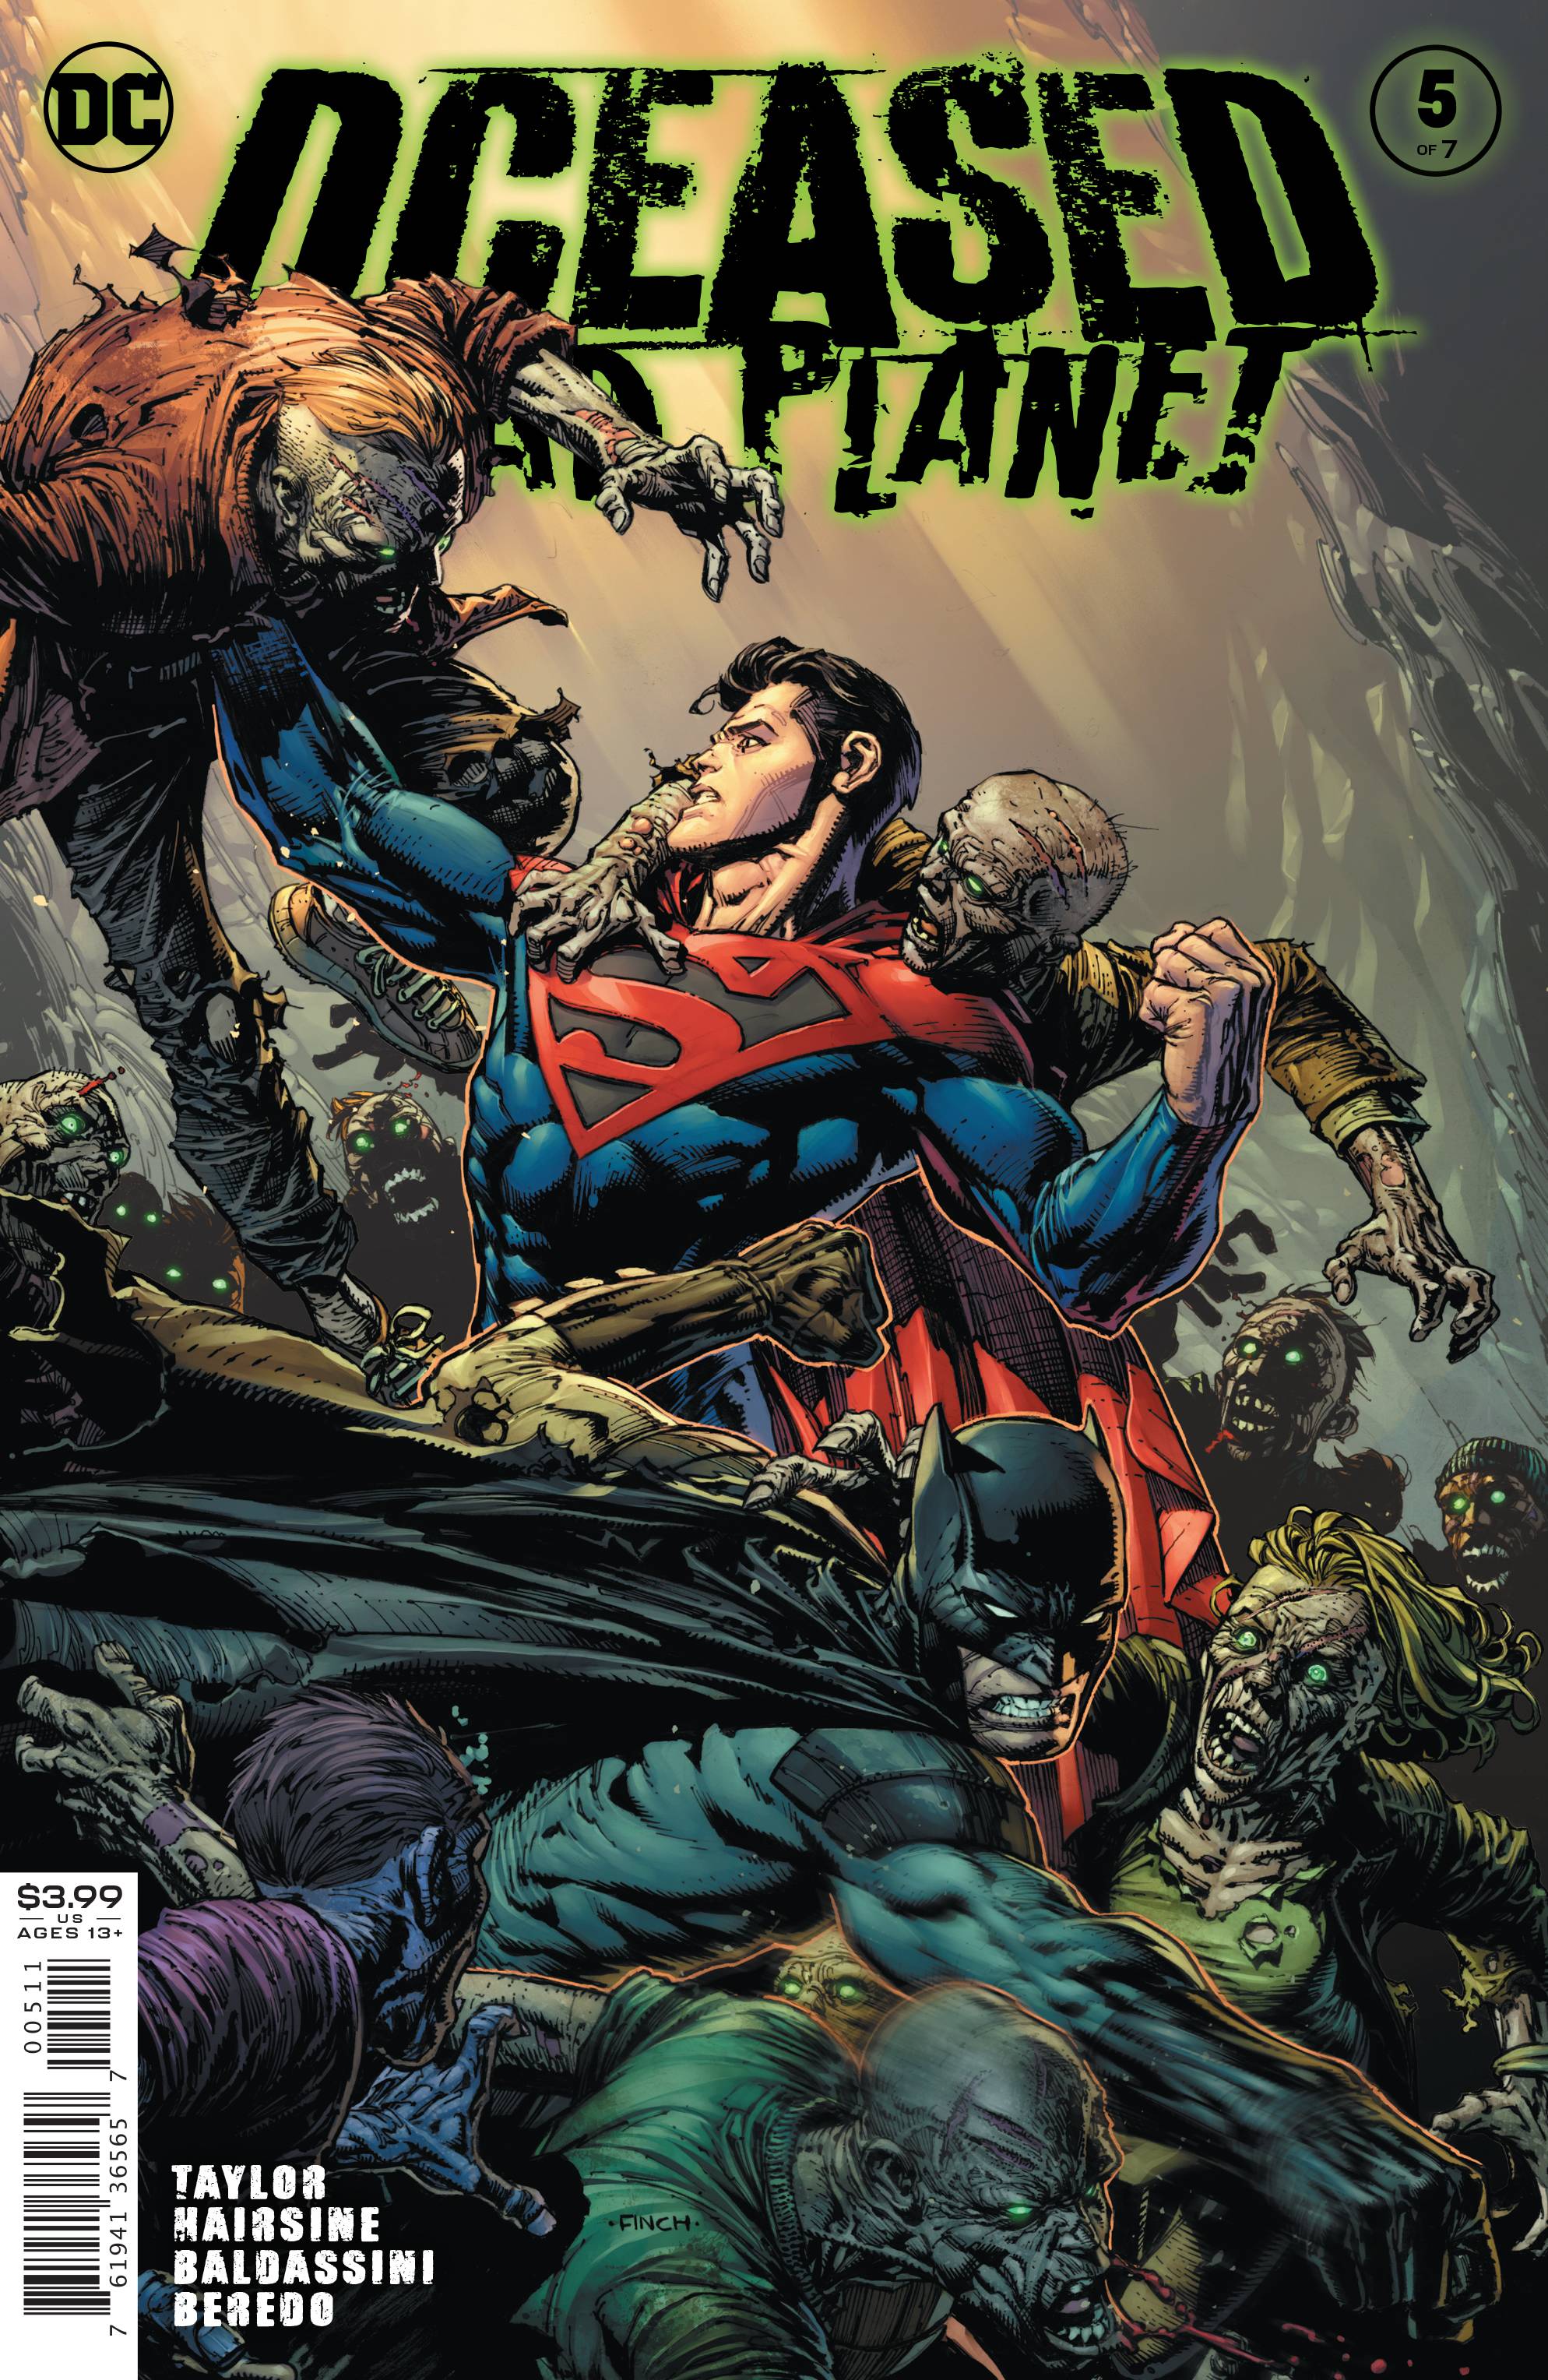 DCEASED DEAD PLANET #5 (OF 6) | Game Master's Emporium (The New GME)